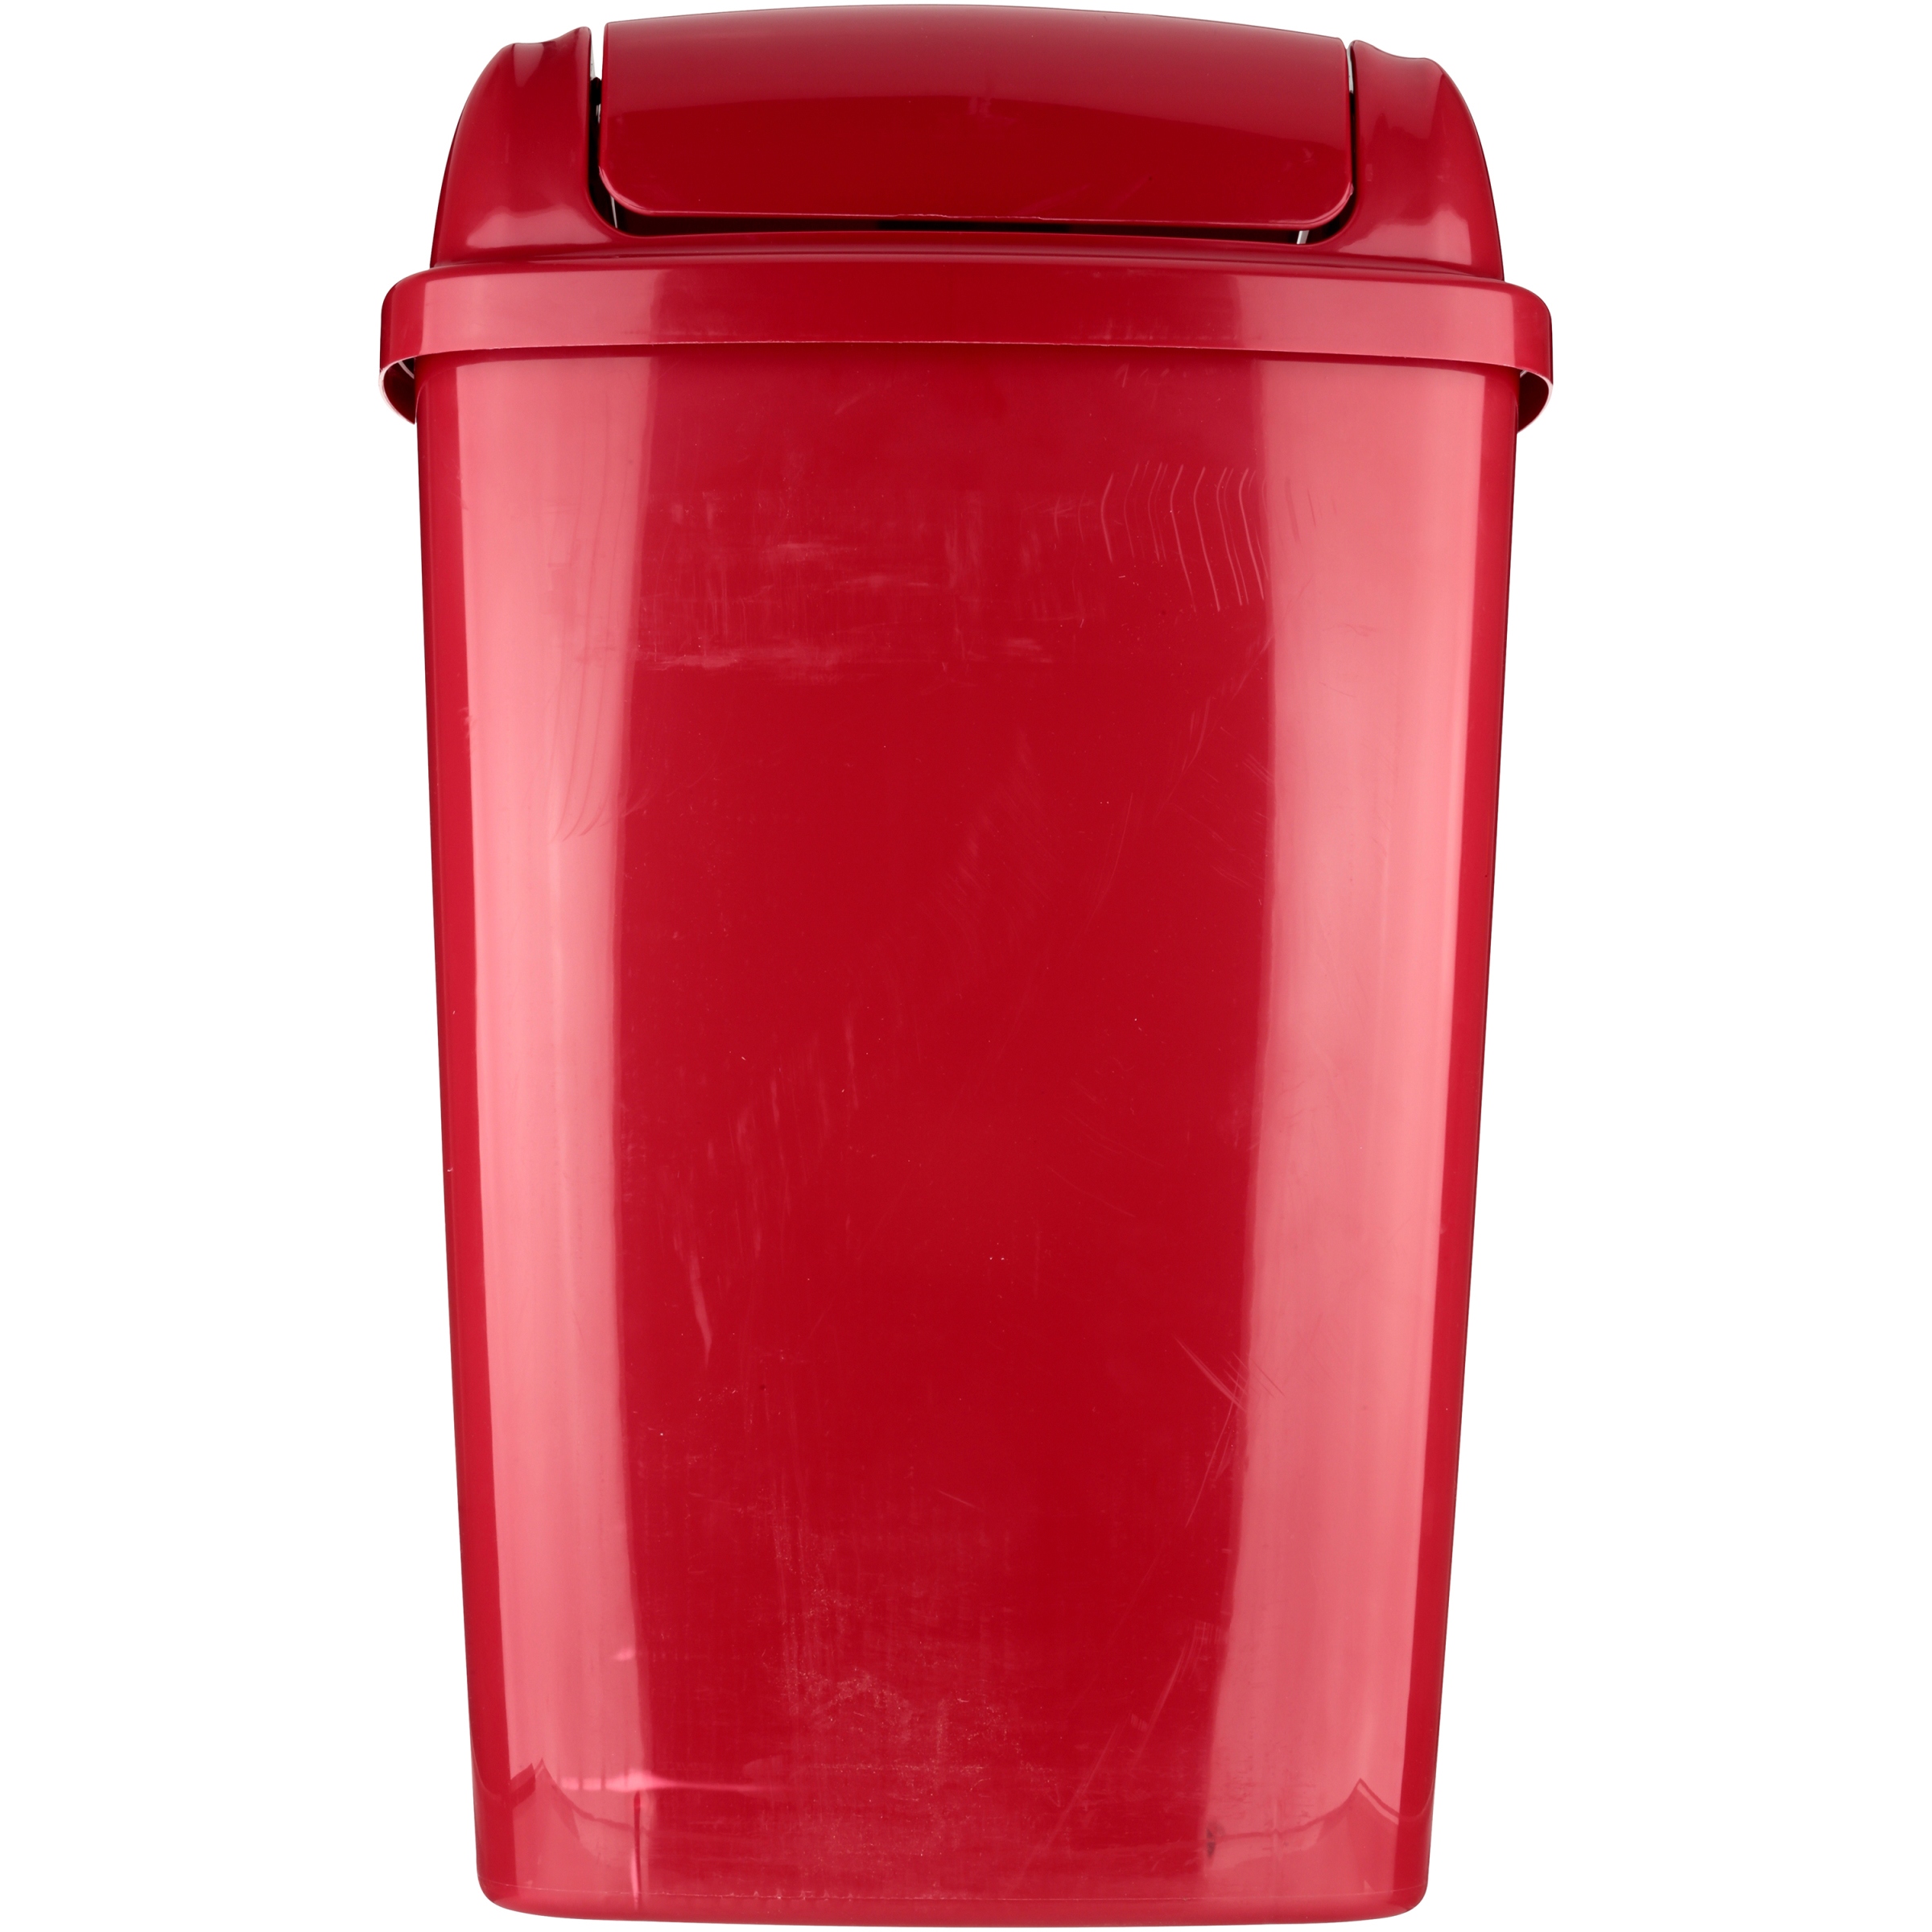 Hefty Swing-Lid 13.5-Gallon Trash Can, Multiple Colors - image 4 of 4